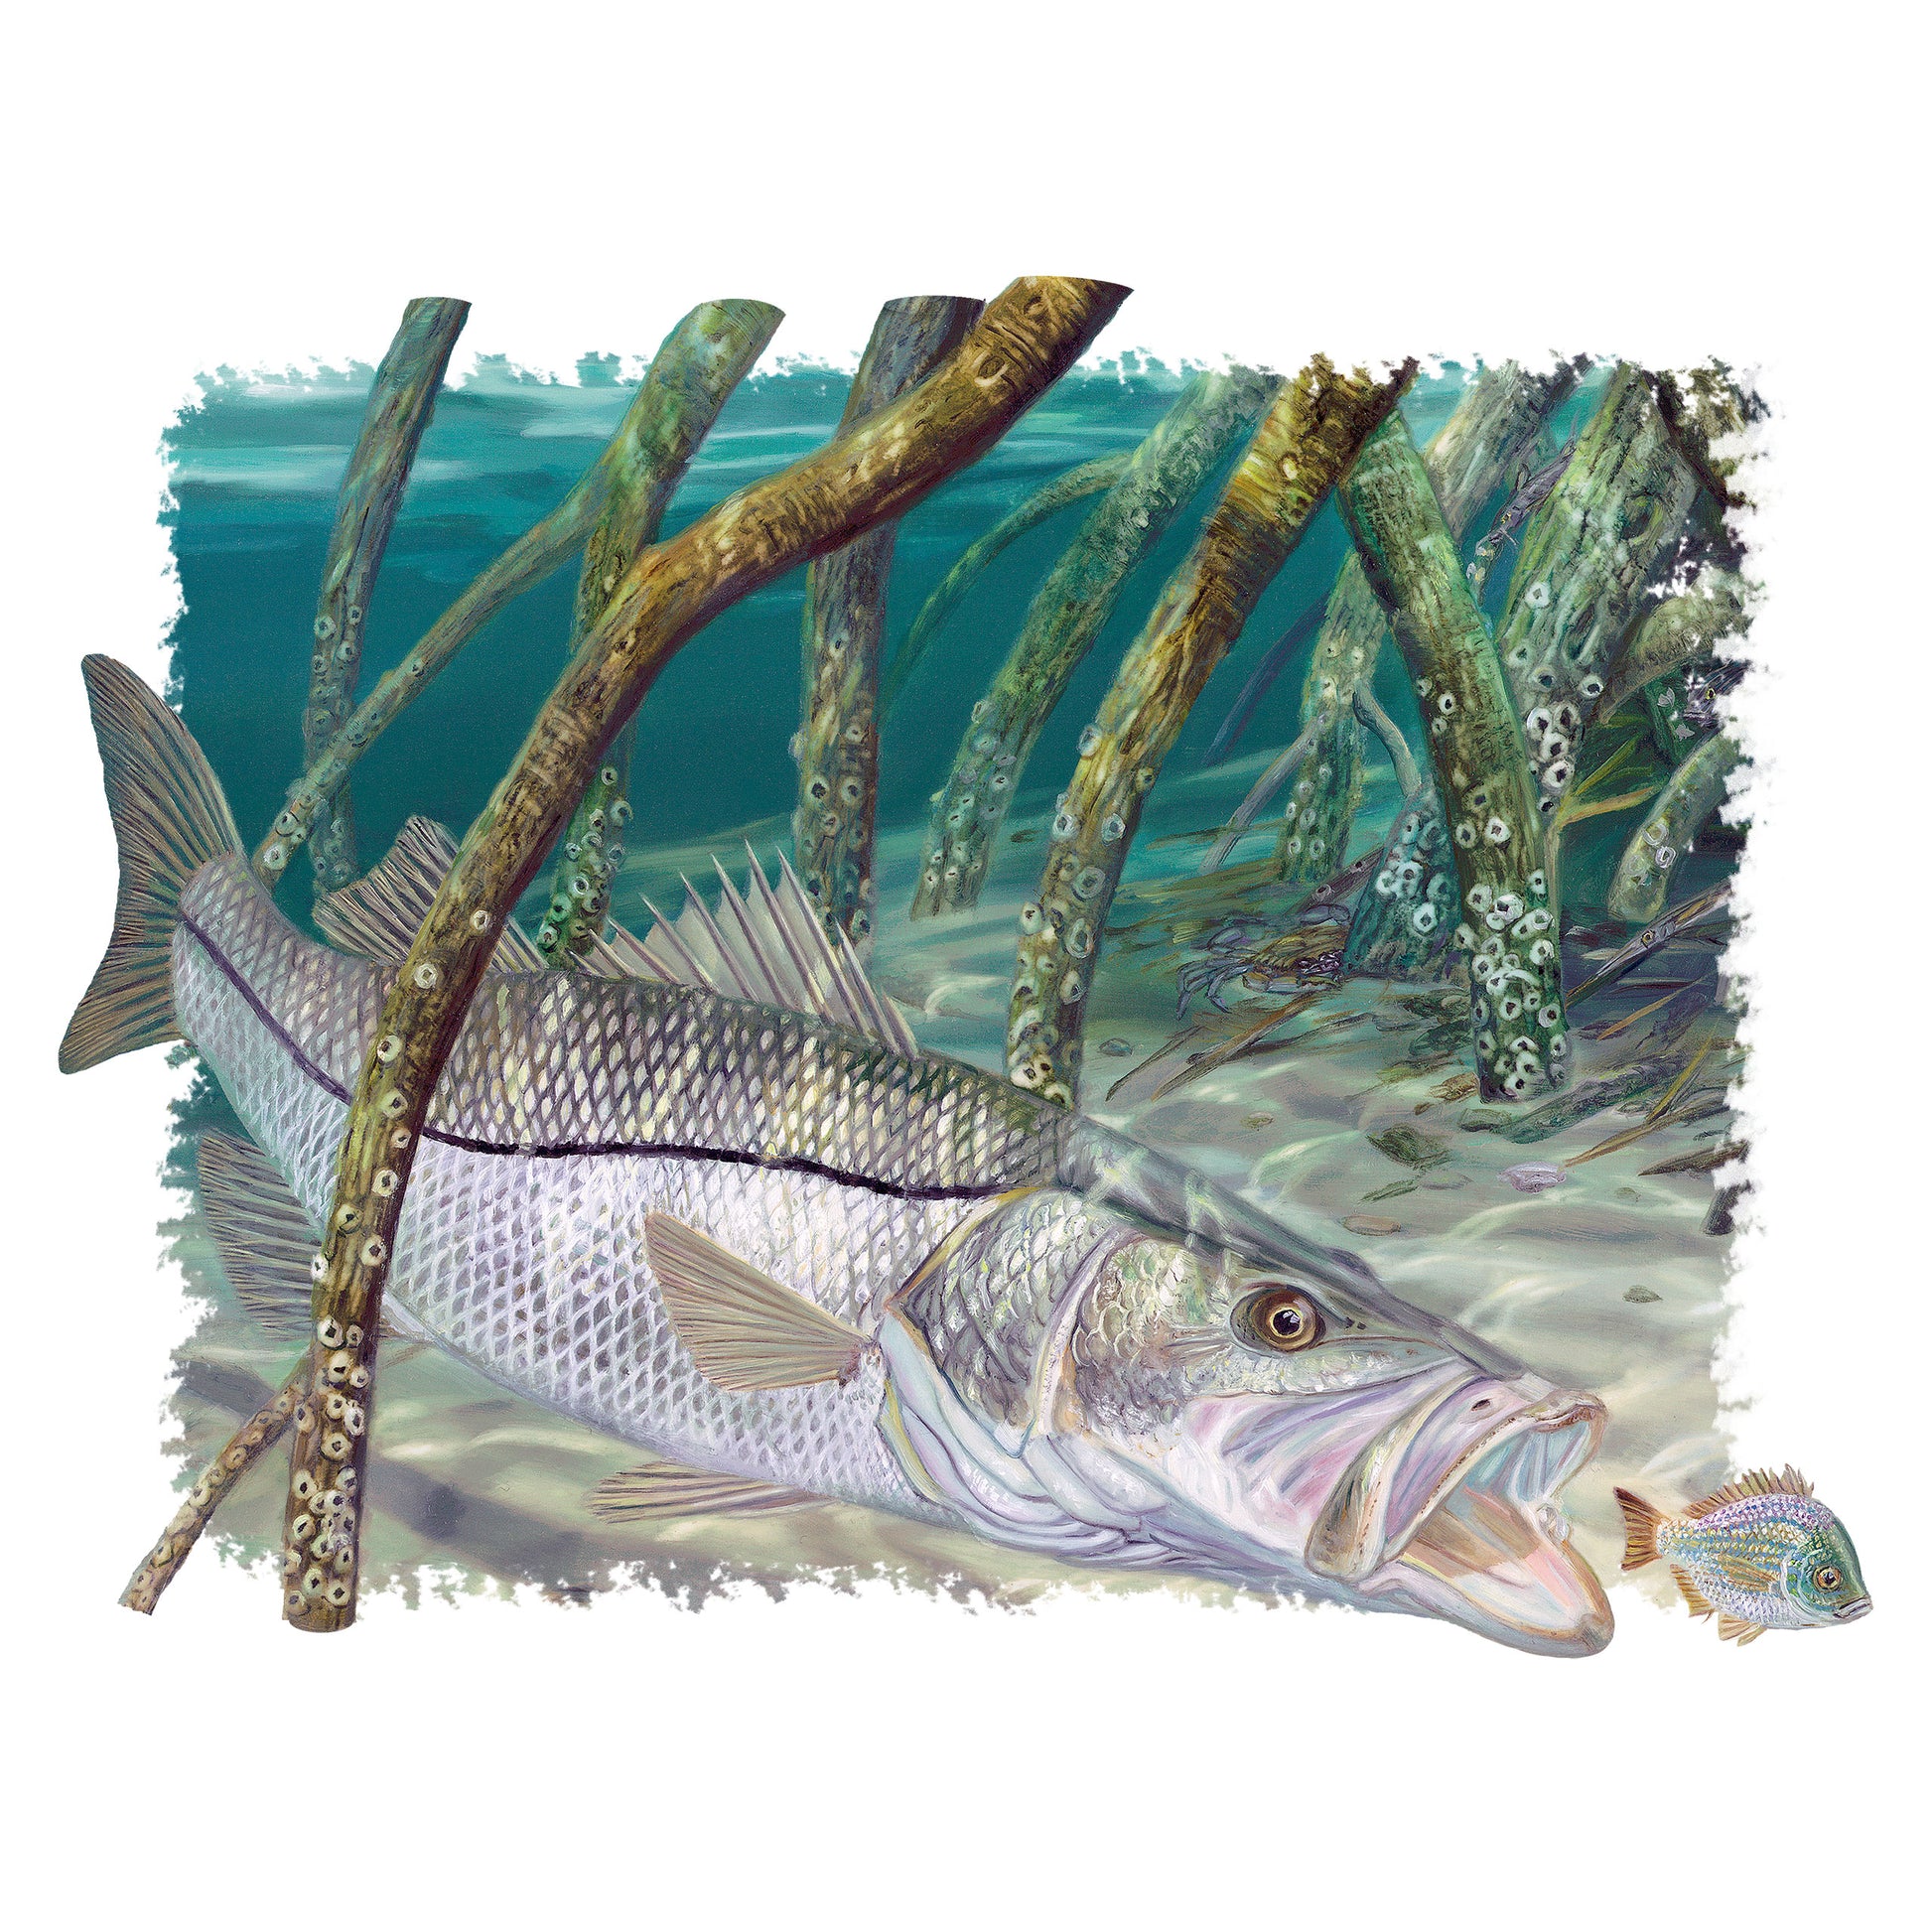 Fishing Shirts for Men Snook Fish in Mangroves by Award Winning Artist Randy McGovern Seagrass / 3XL